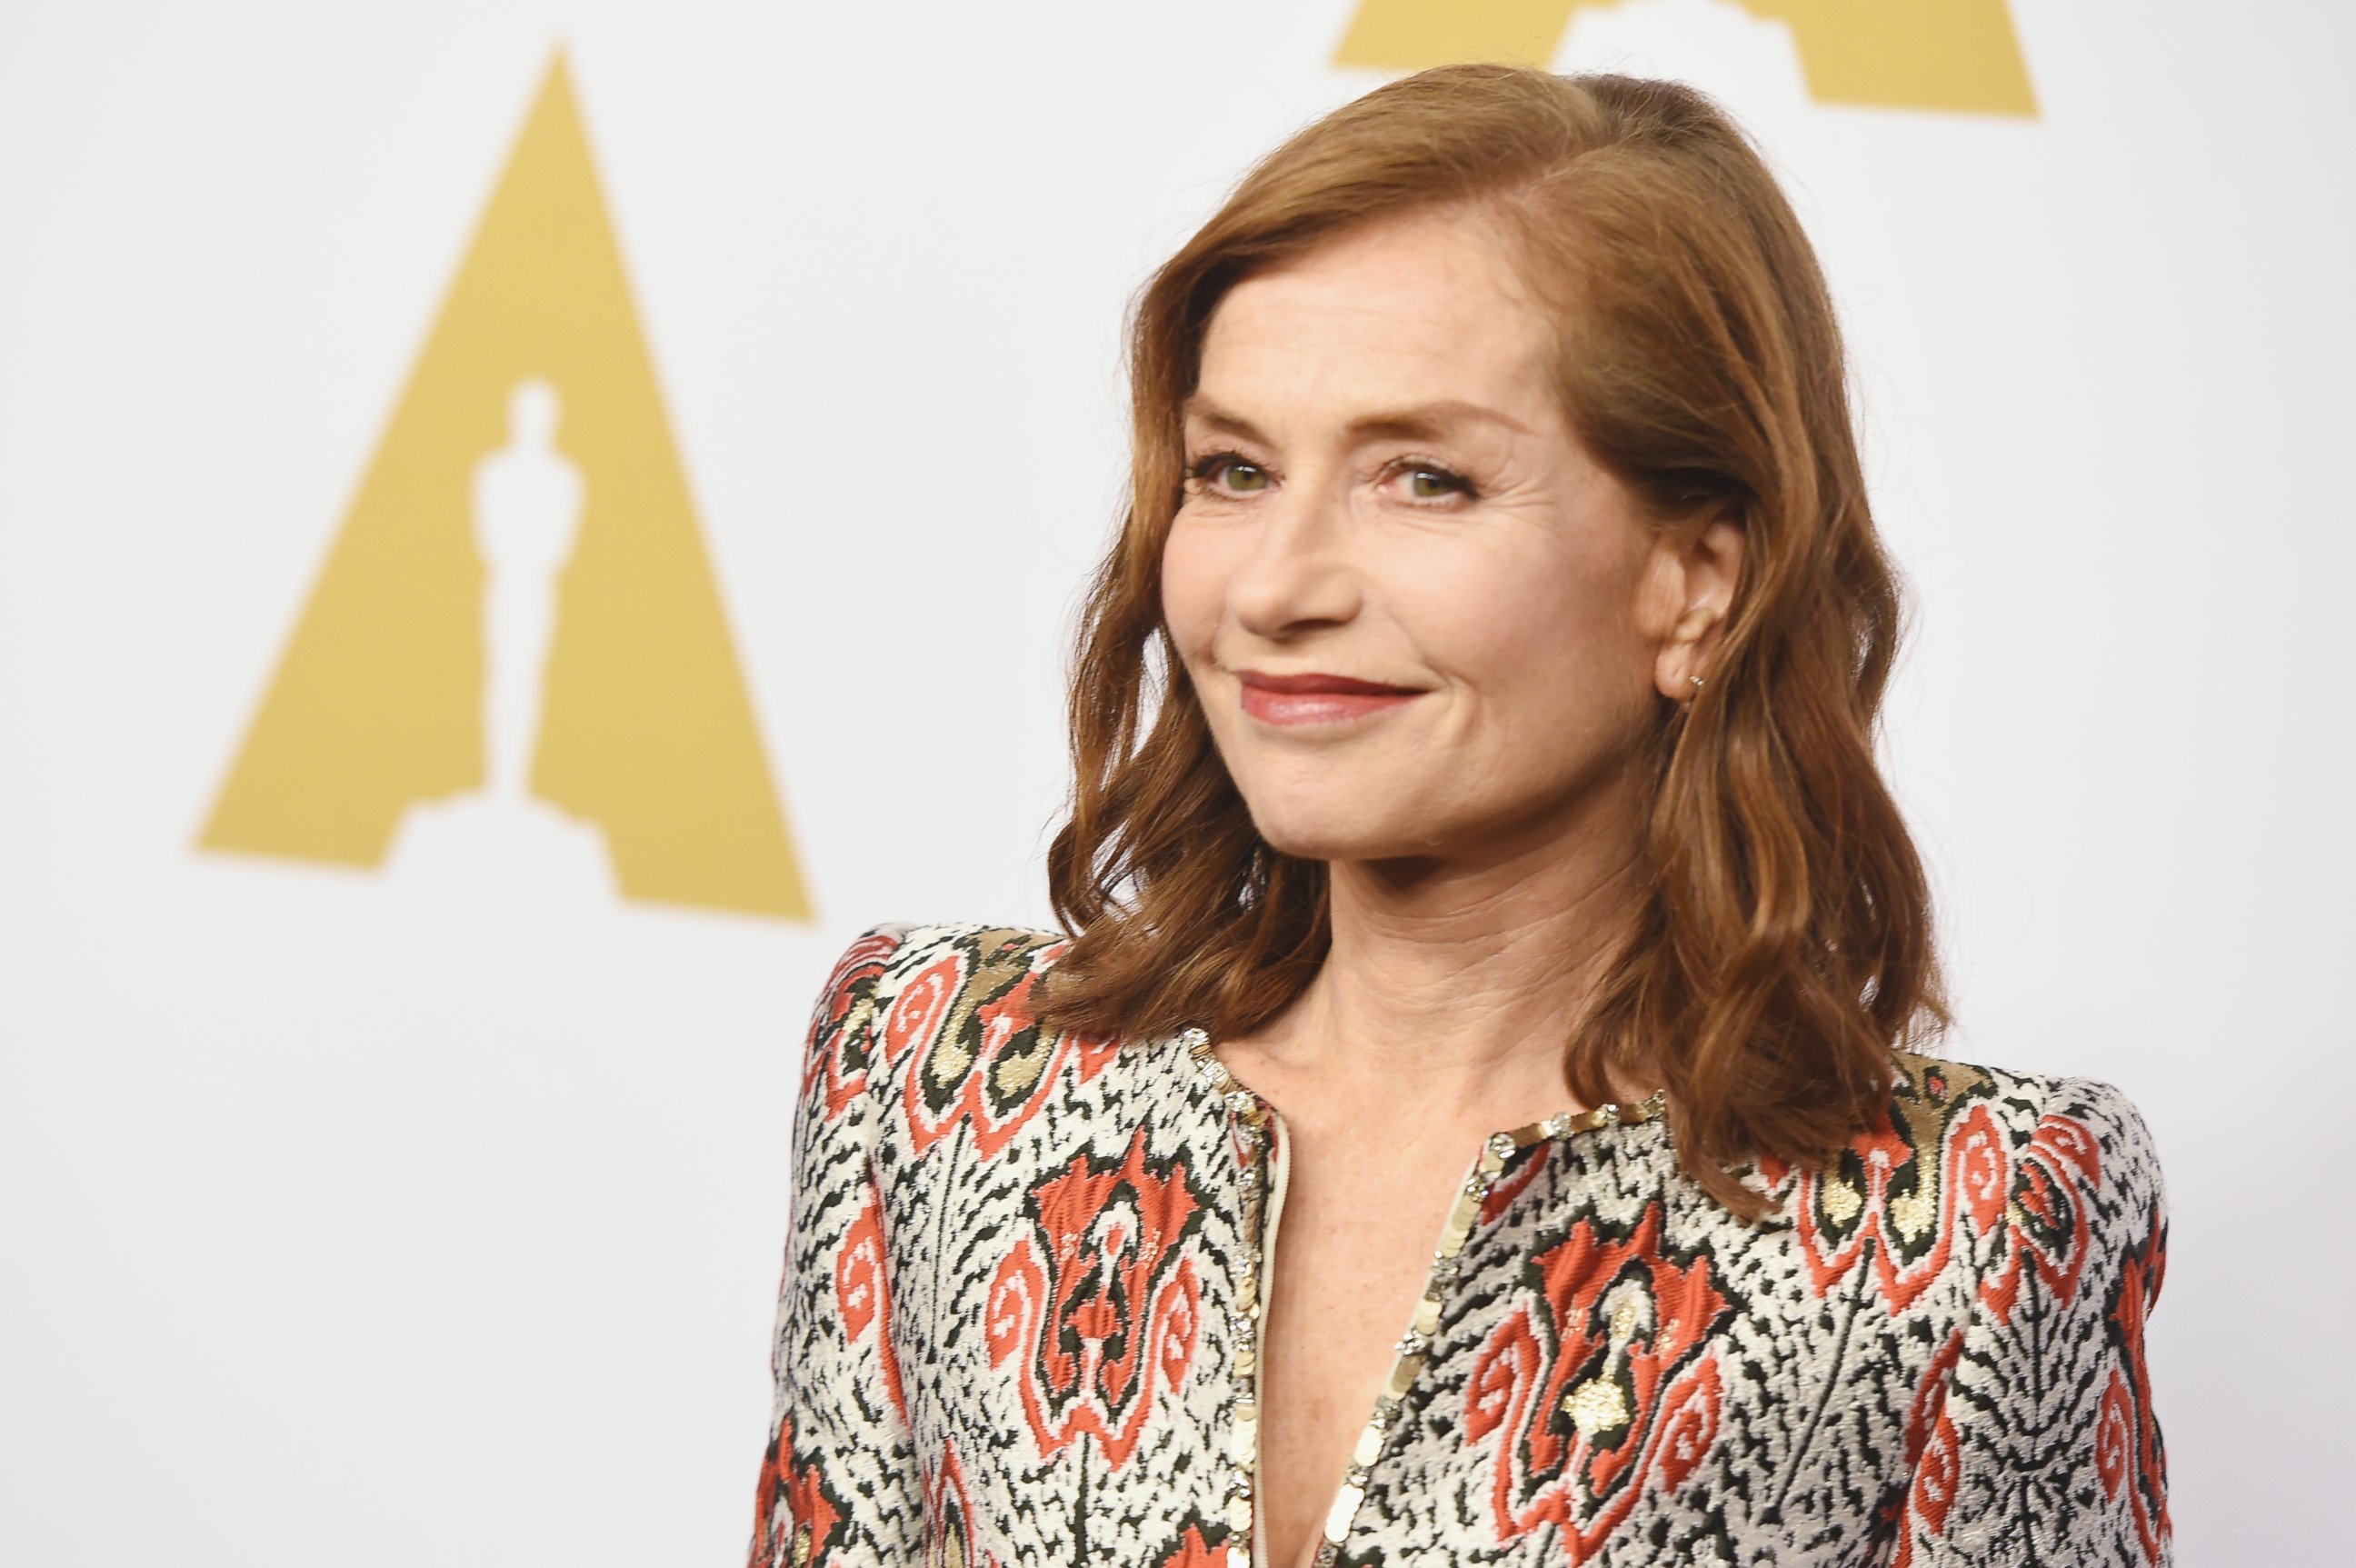 PHOTO: Isabelle Huppert attends the 89th Annual Academy Awards Nominee Luncheon at The Beverly Hilton Hotel, Feb. 6, 2017, in Beverly Hills, California.